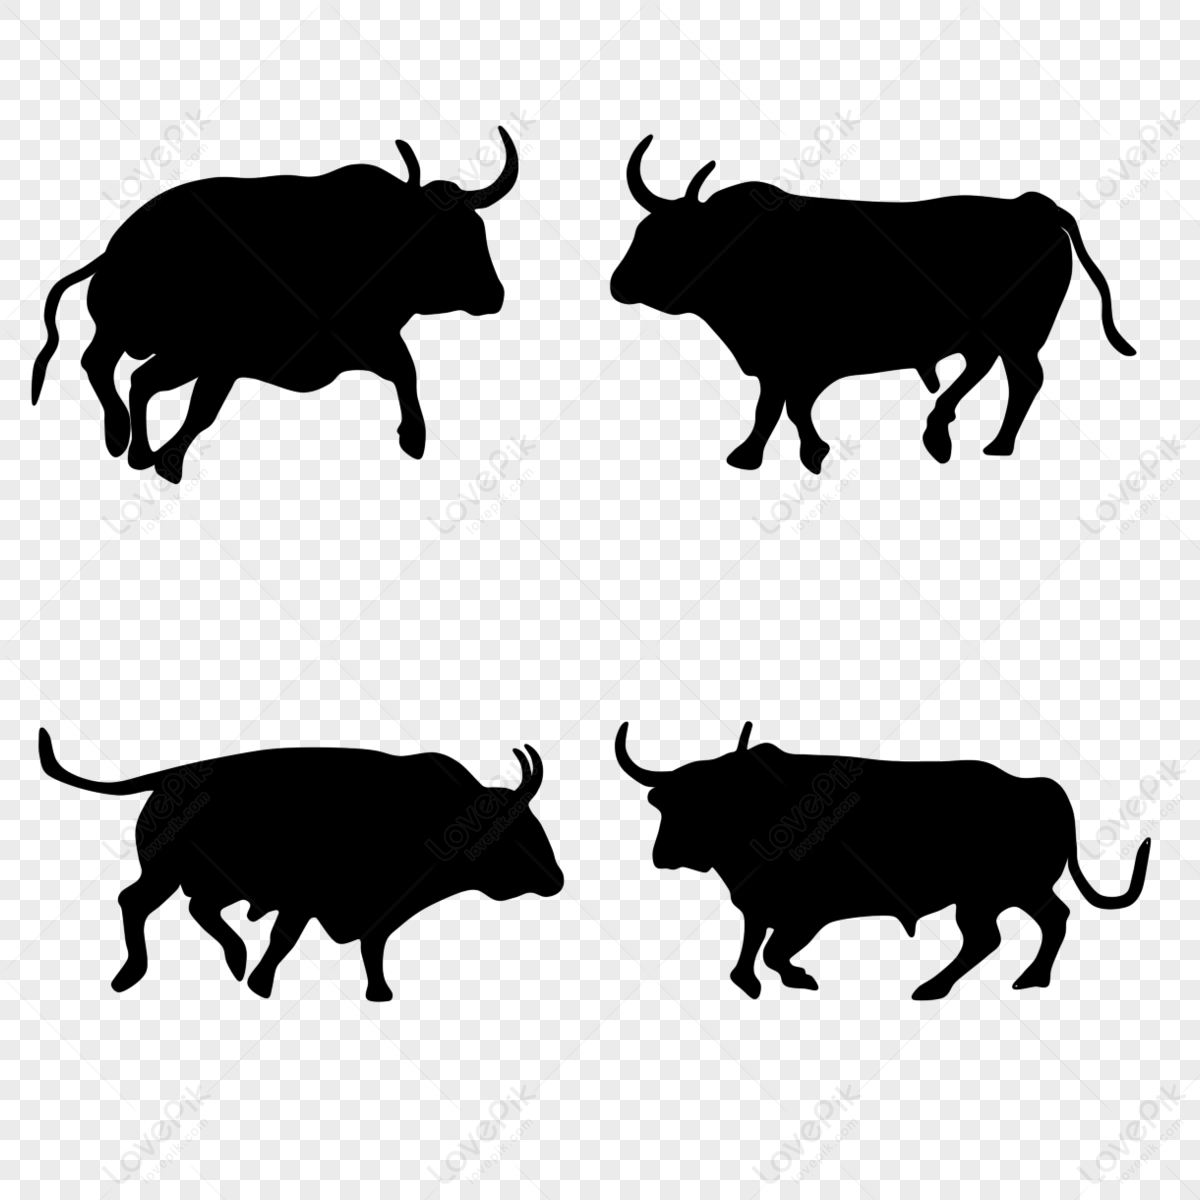 Animal Running PNG Images With Transparent Background | Free Download ...